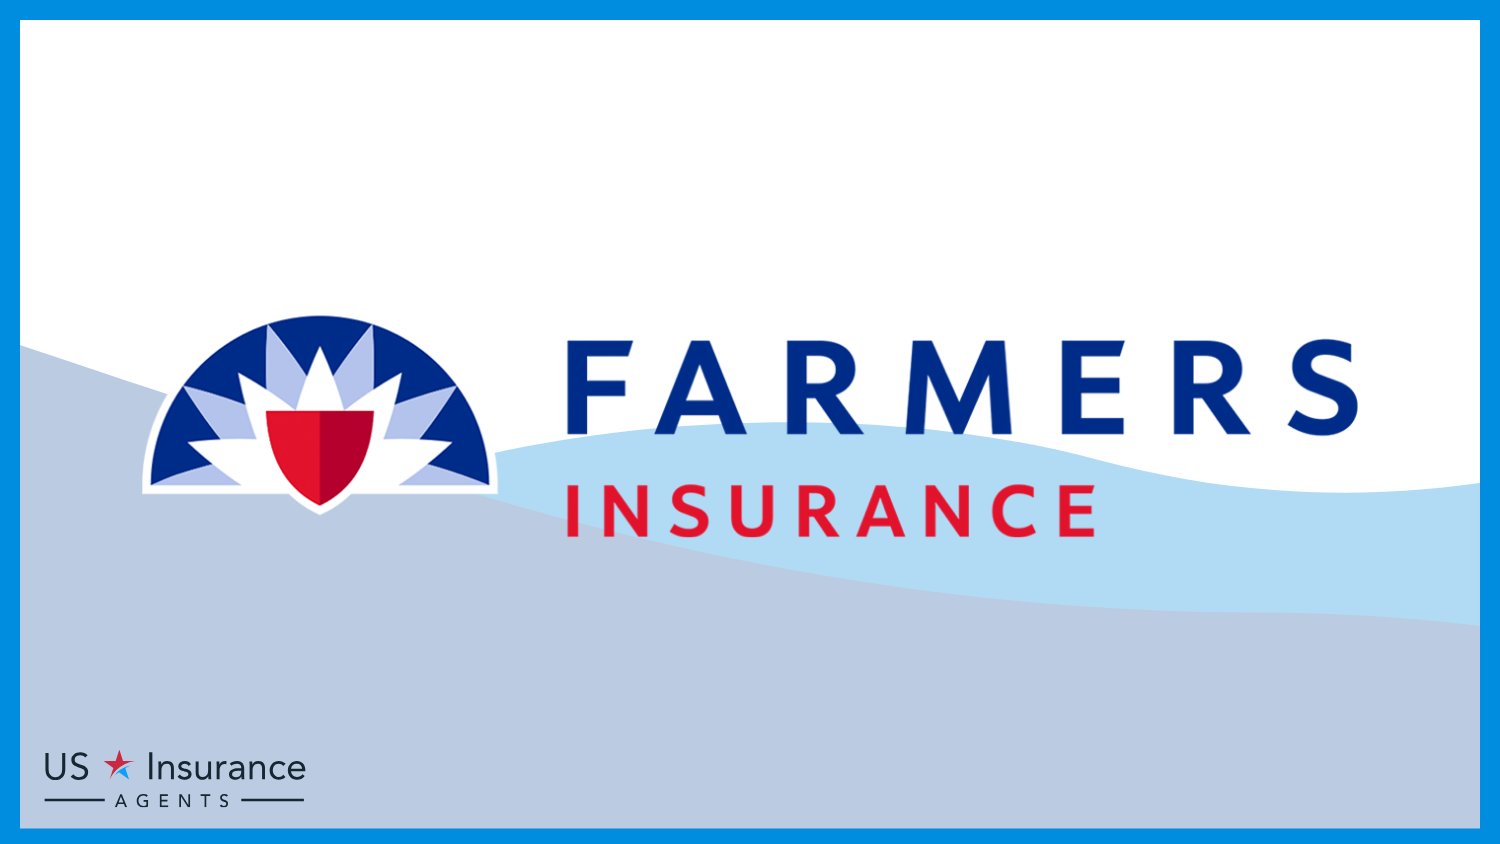 Best Business Insurance for Contractors: Farmers 